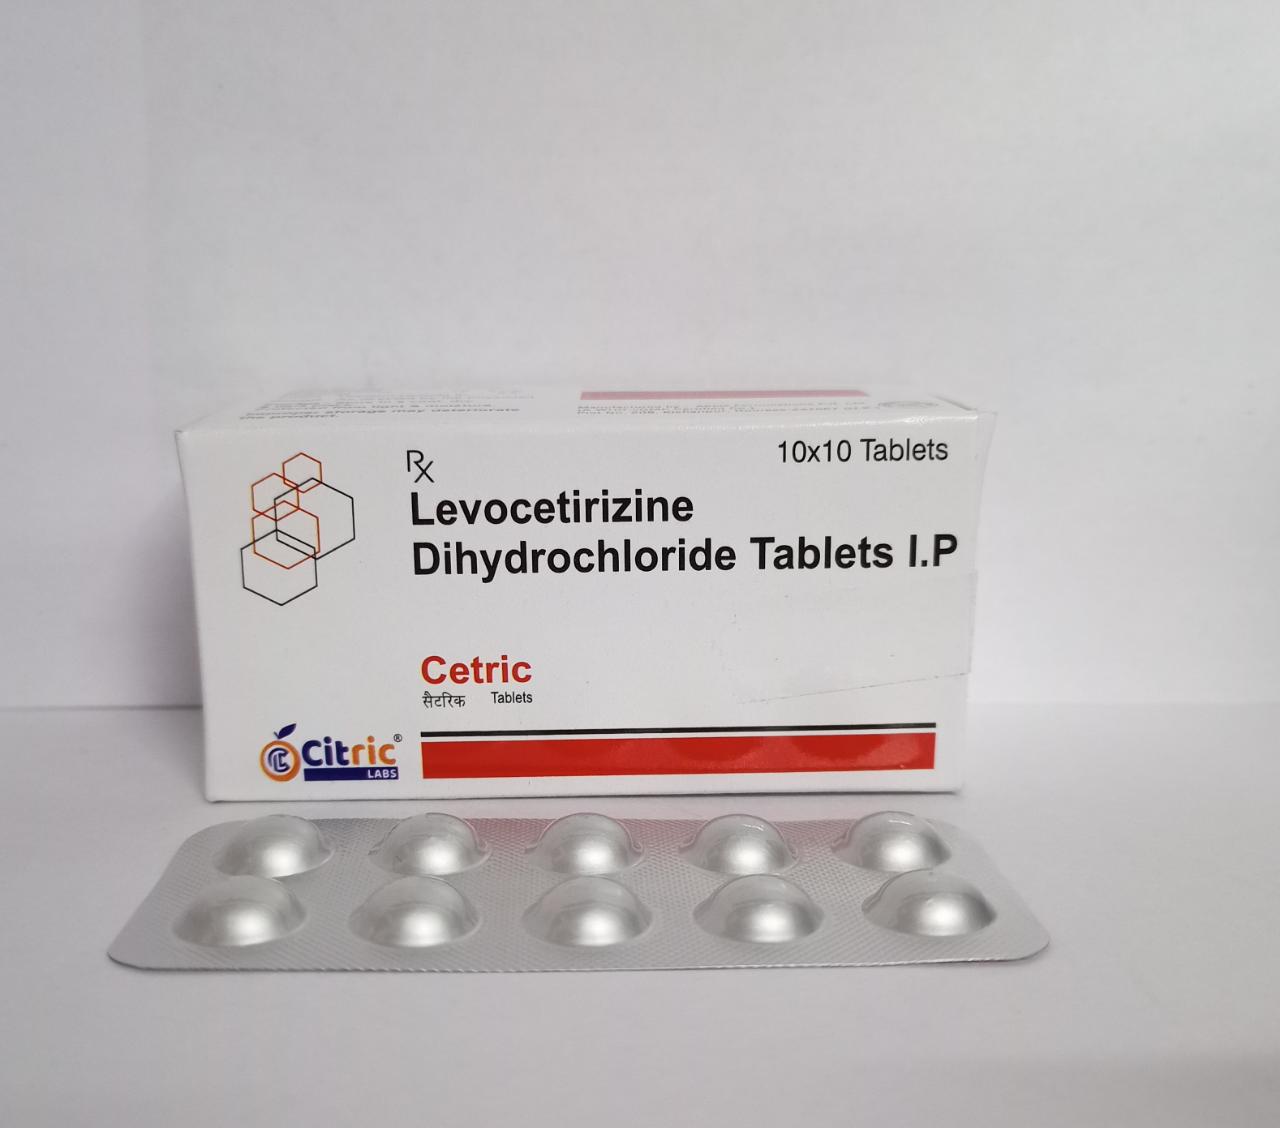 CETRIC-5 Tablets